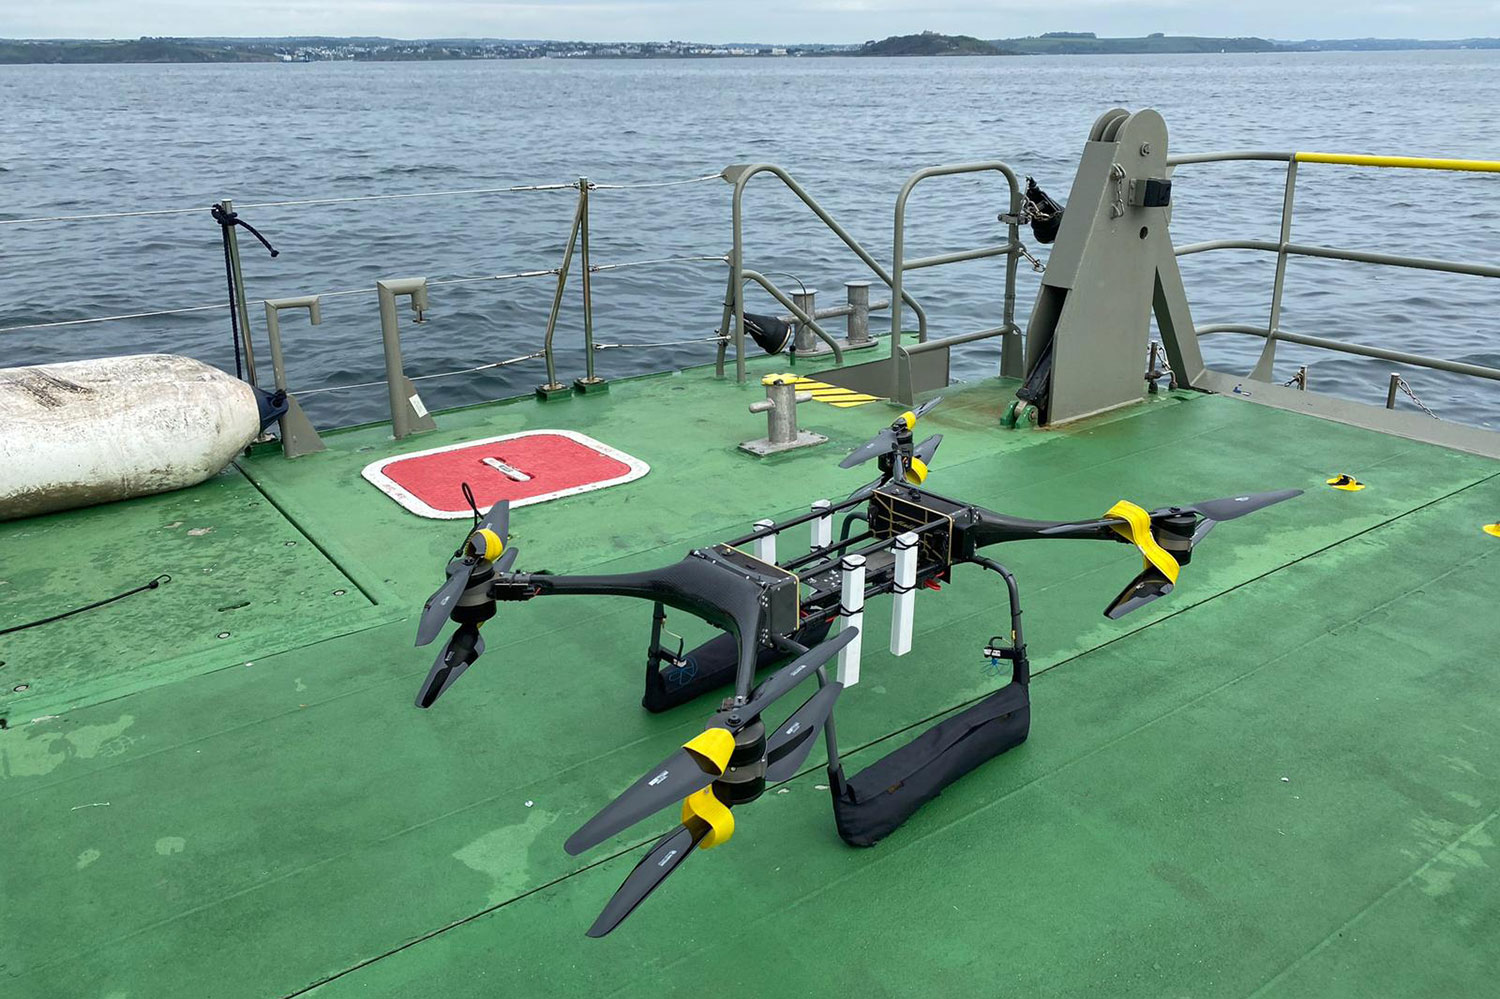 Royal Navy tests drones to help rescue sailors who fall overboard